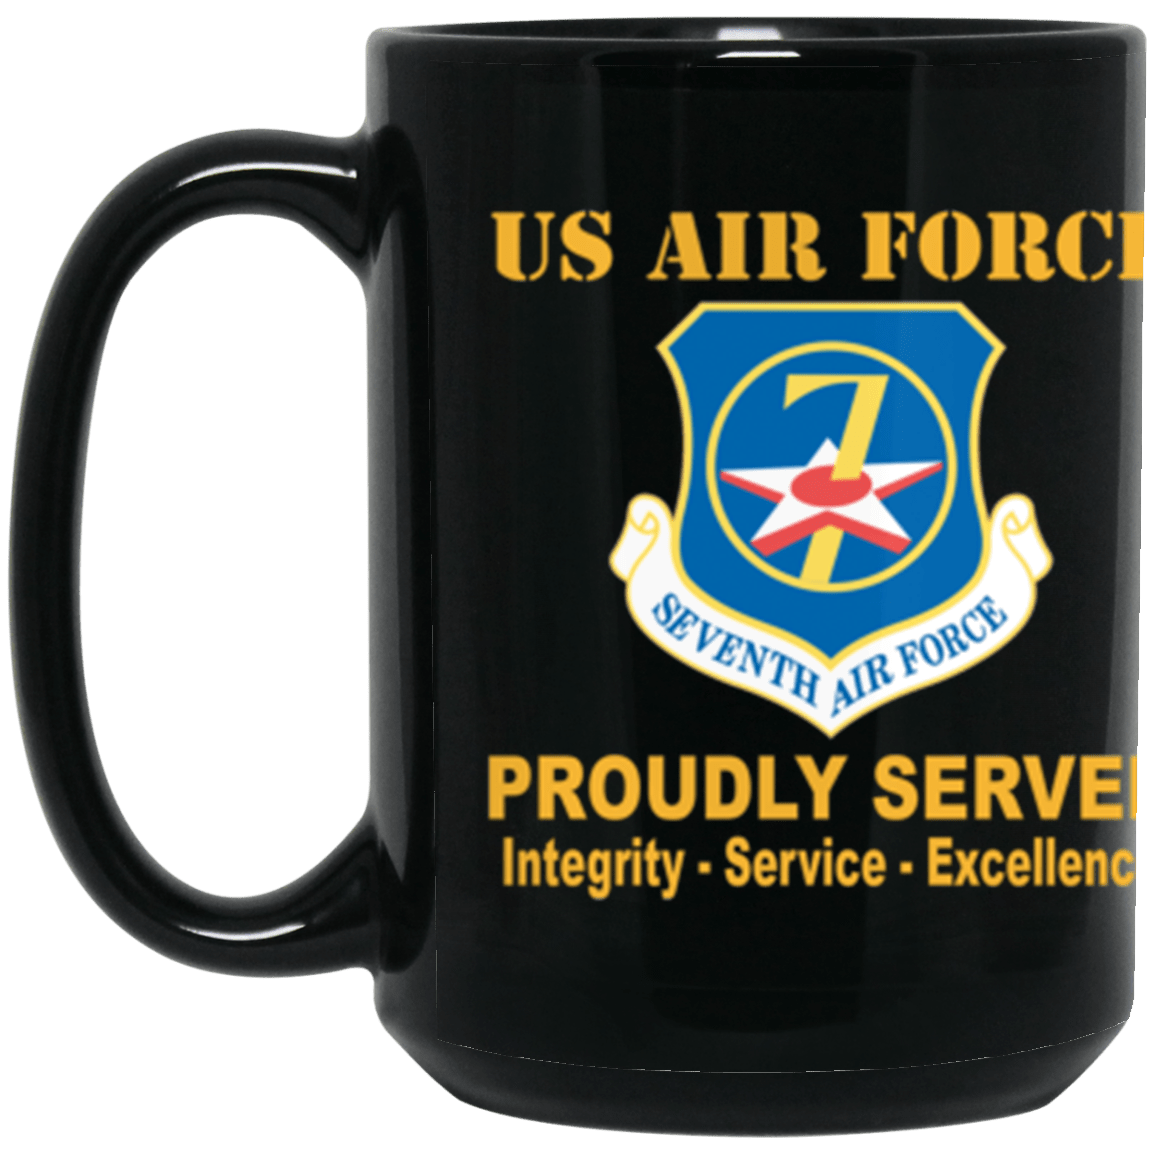 US Air Force Seventh Air Force Proudly Served Core Values 15 oz. Black Mug-Drinkware-Veterans Nation